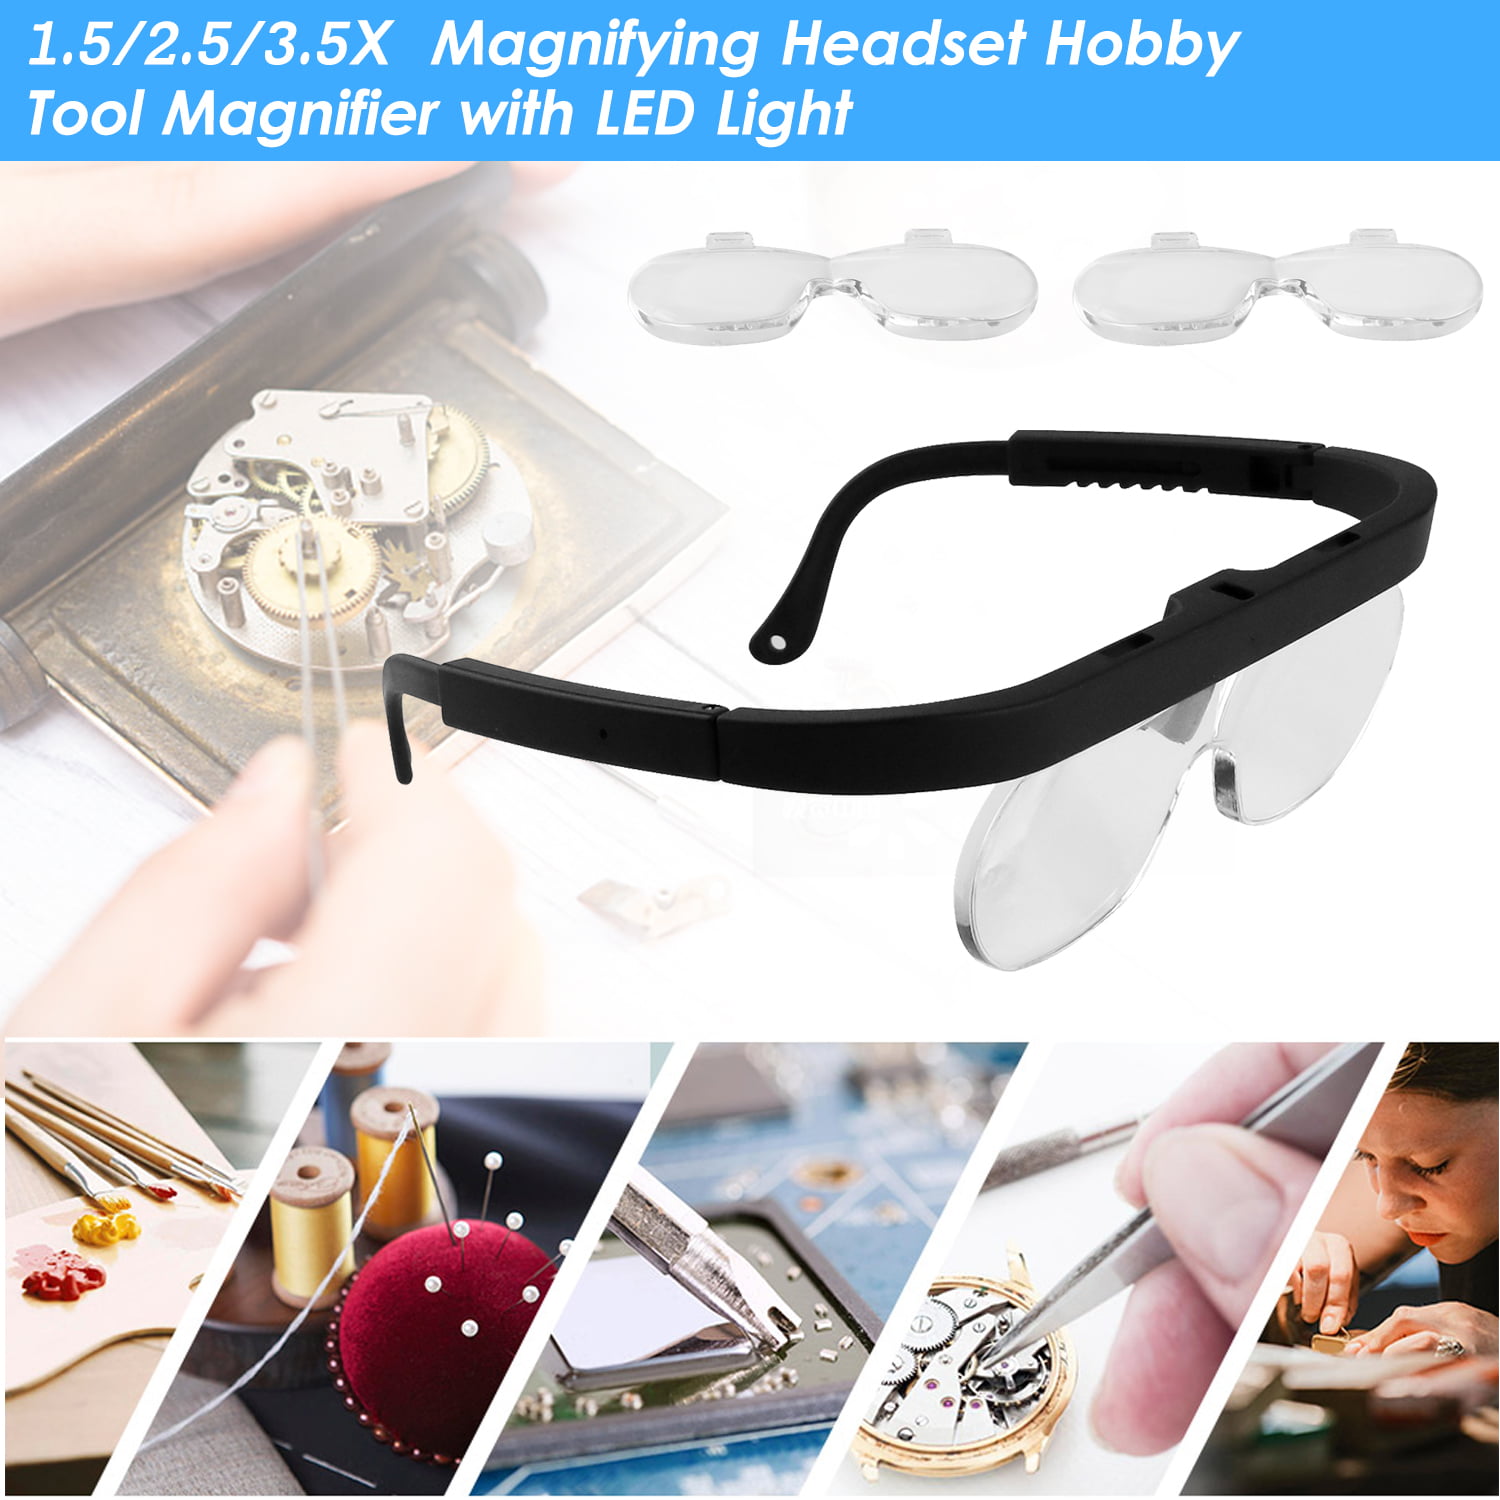 Carevas 1.52.53.5X Magnifying Glasses Magnifying Headset Head Mounted  Jewelry Loupe Magnifier with Multiple Lens for Crafting Watch Electronics  Hobby Tool 